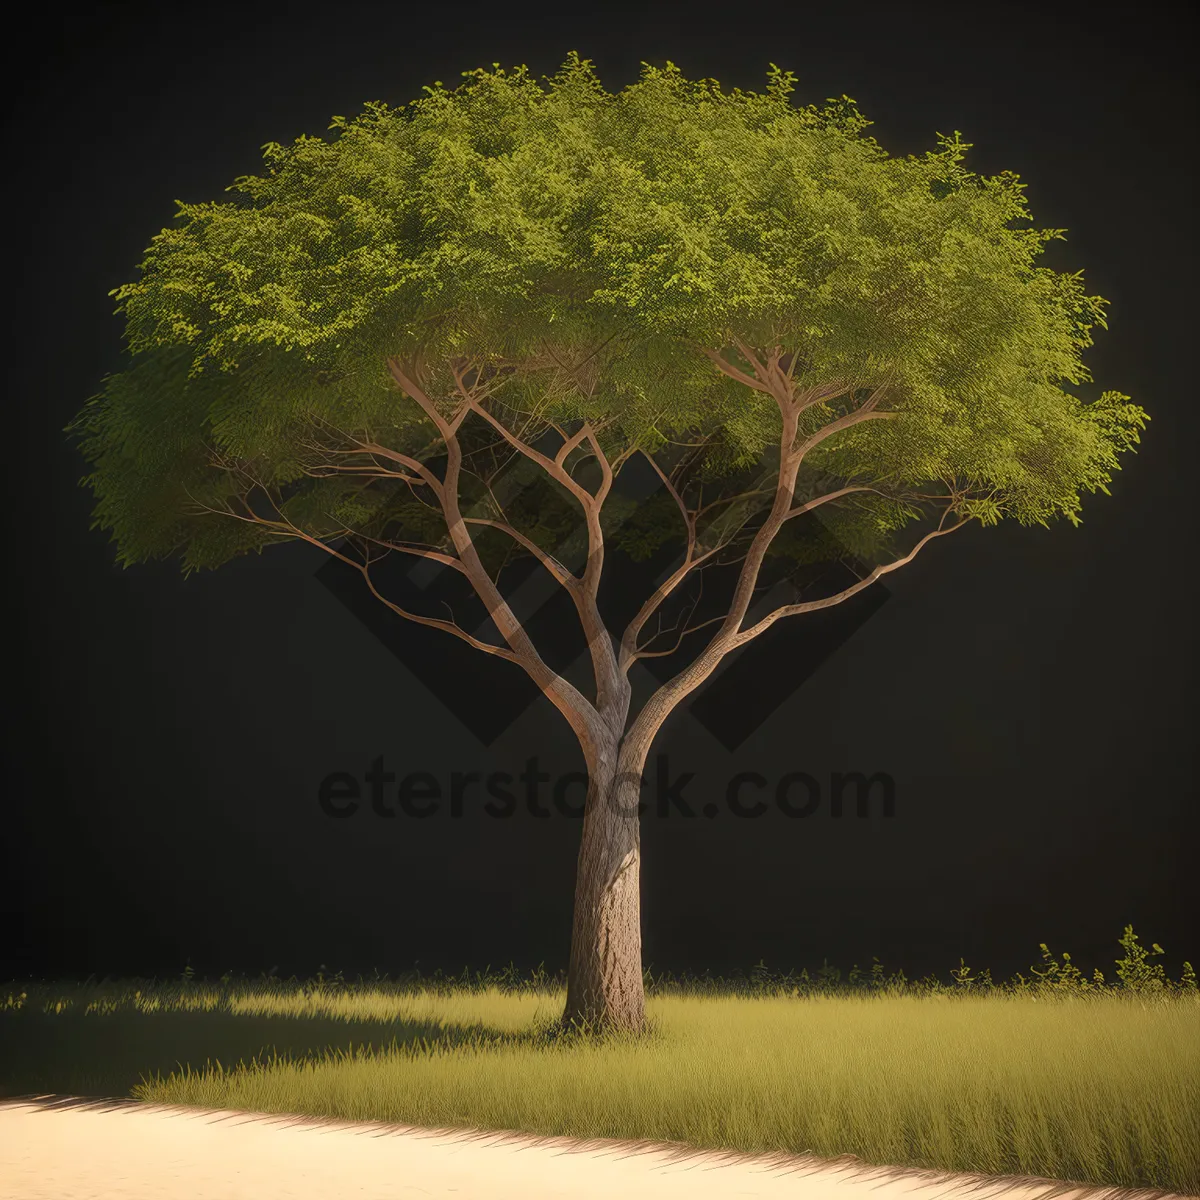 Picture of Sunlit Acacia Tree in Rural Meadow